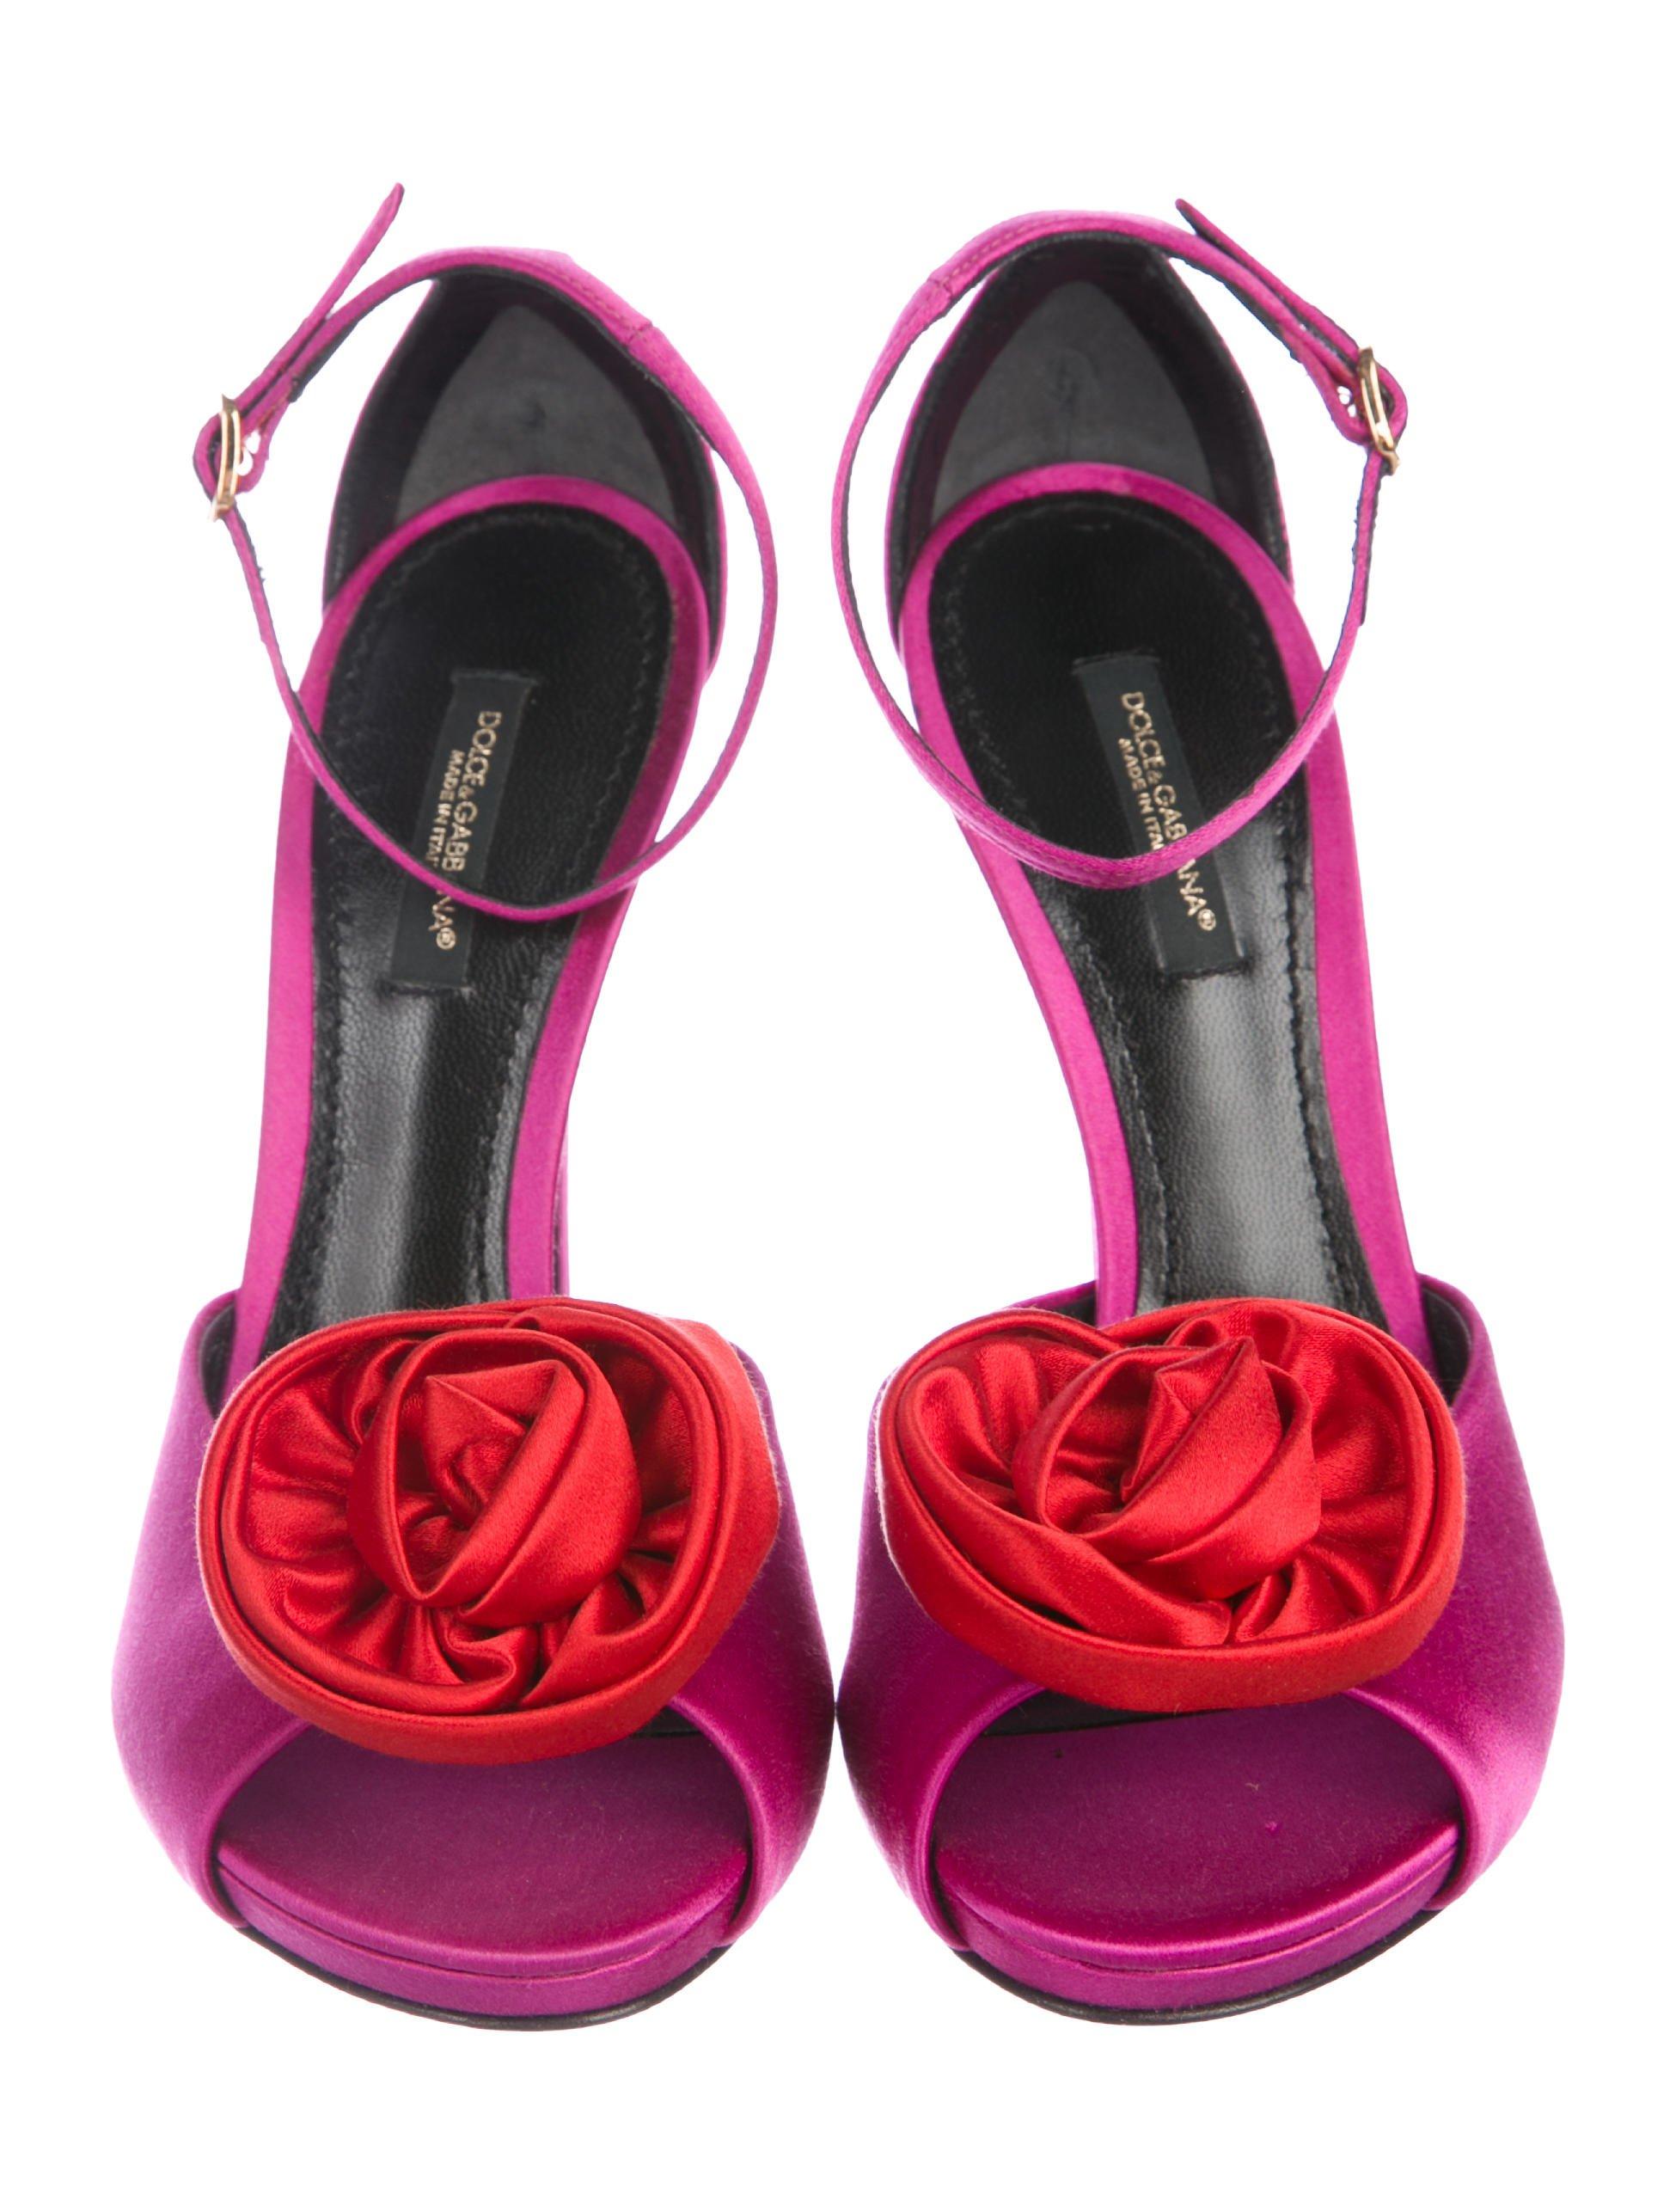 Dolce & Gabbana NEW Purple Red Rose Mary Jane Pumps Heels Sandals in Box

Size IT 36.5
Satin
Ankle buckle closure
Made in Italy
Heel height 4.75